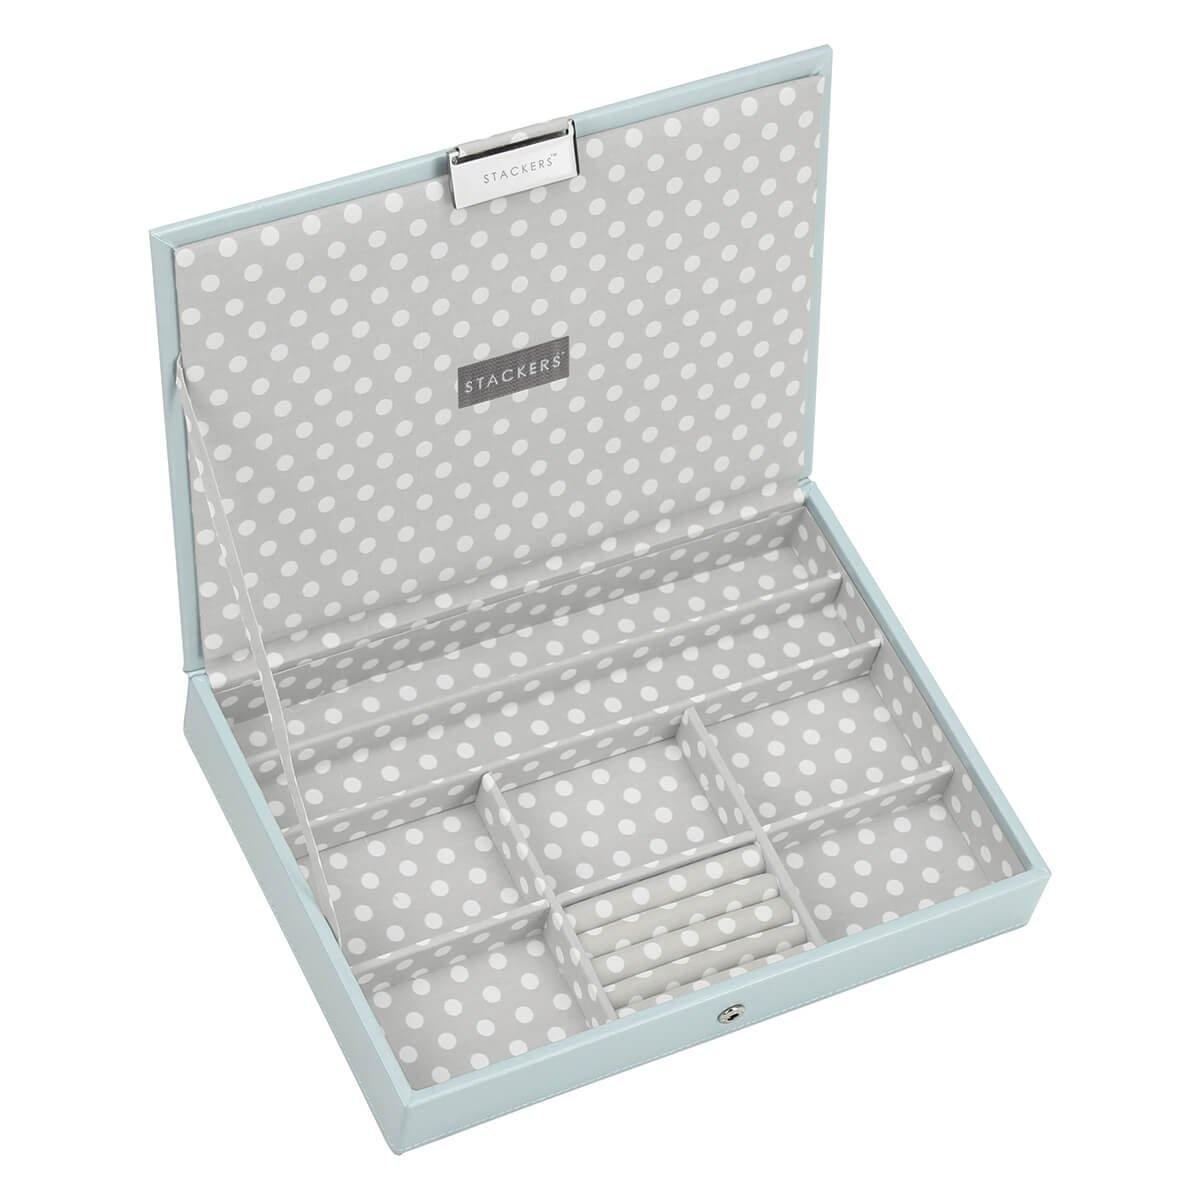 Duck Egg Blue with Grey STACKERS &#39;CLASSIC SIZE Lidded STACKER Jewellery Box Polka Dot Lining